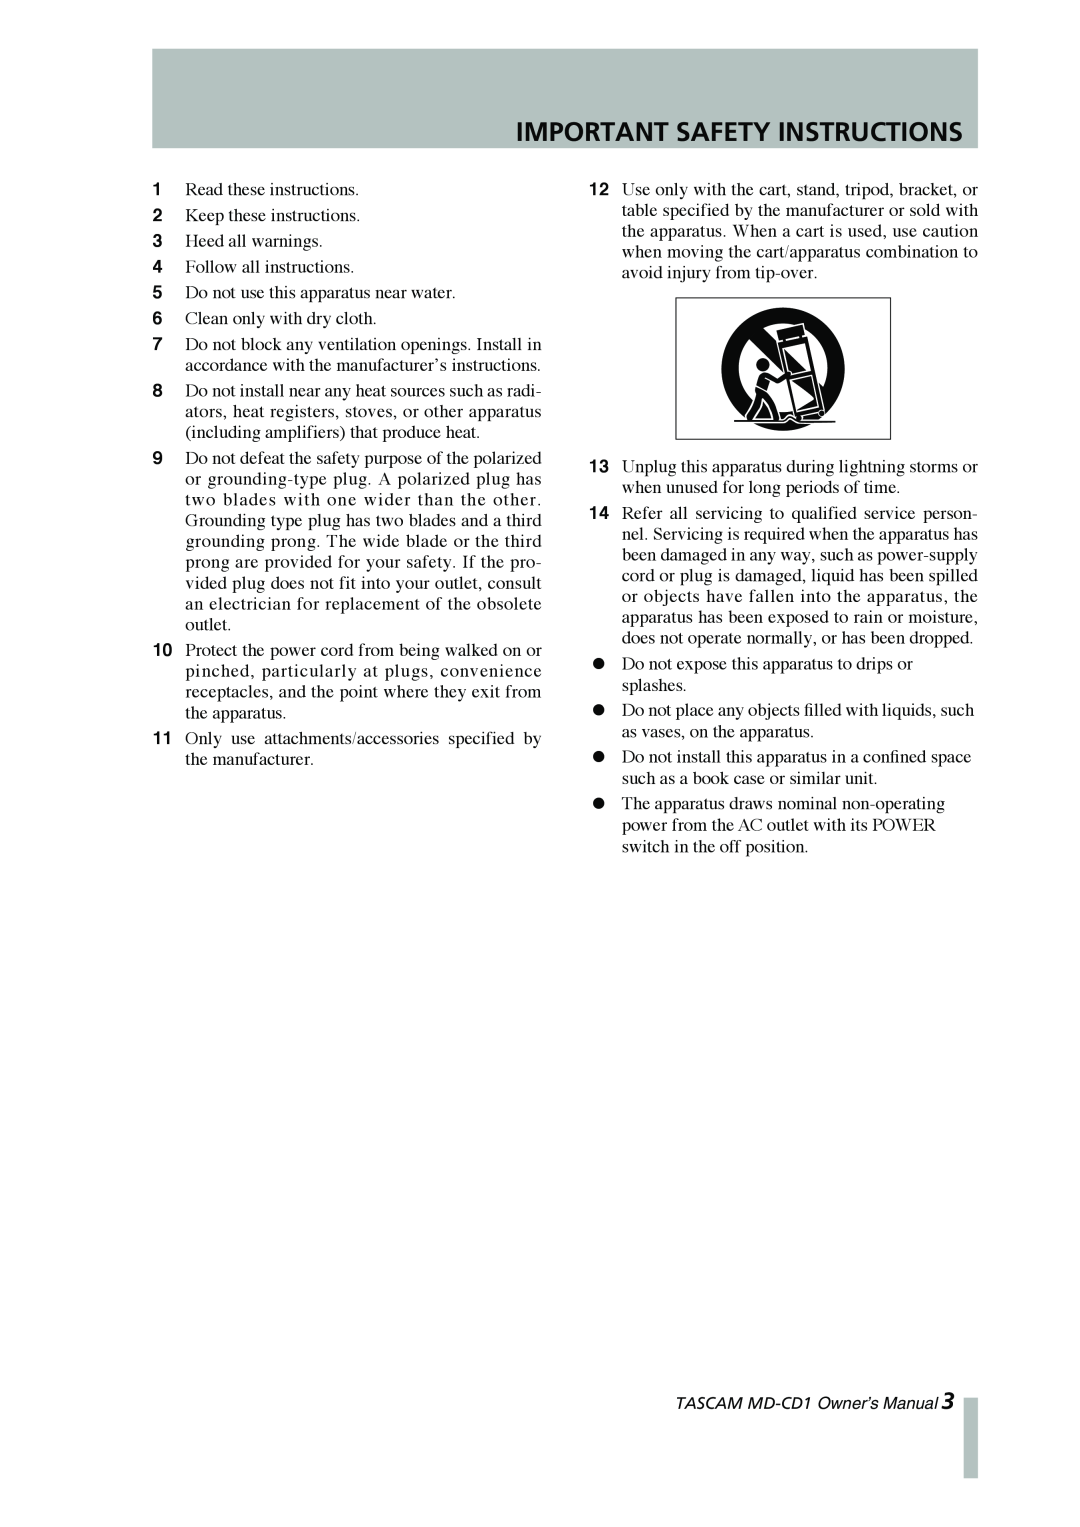 Tascam MD-CD1 owner manual Important Safety Instructions 